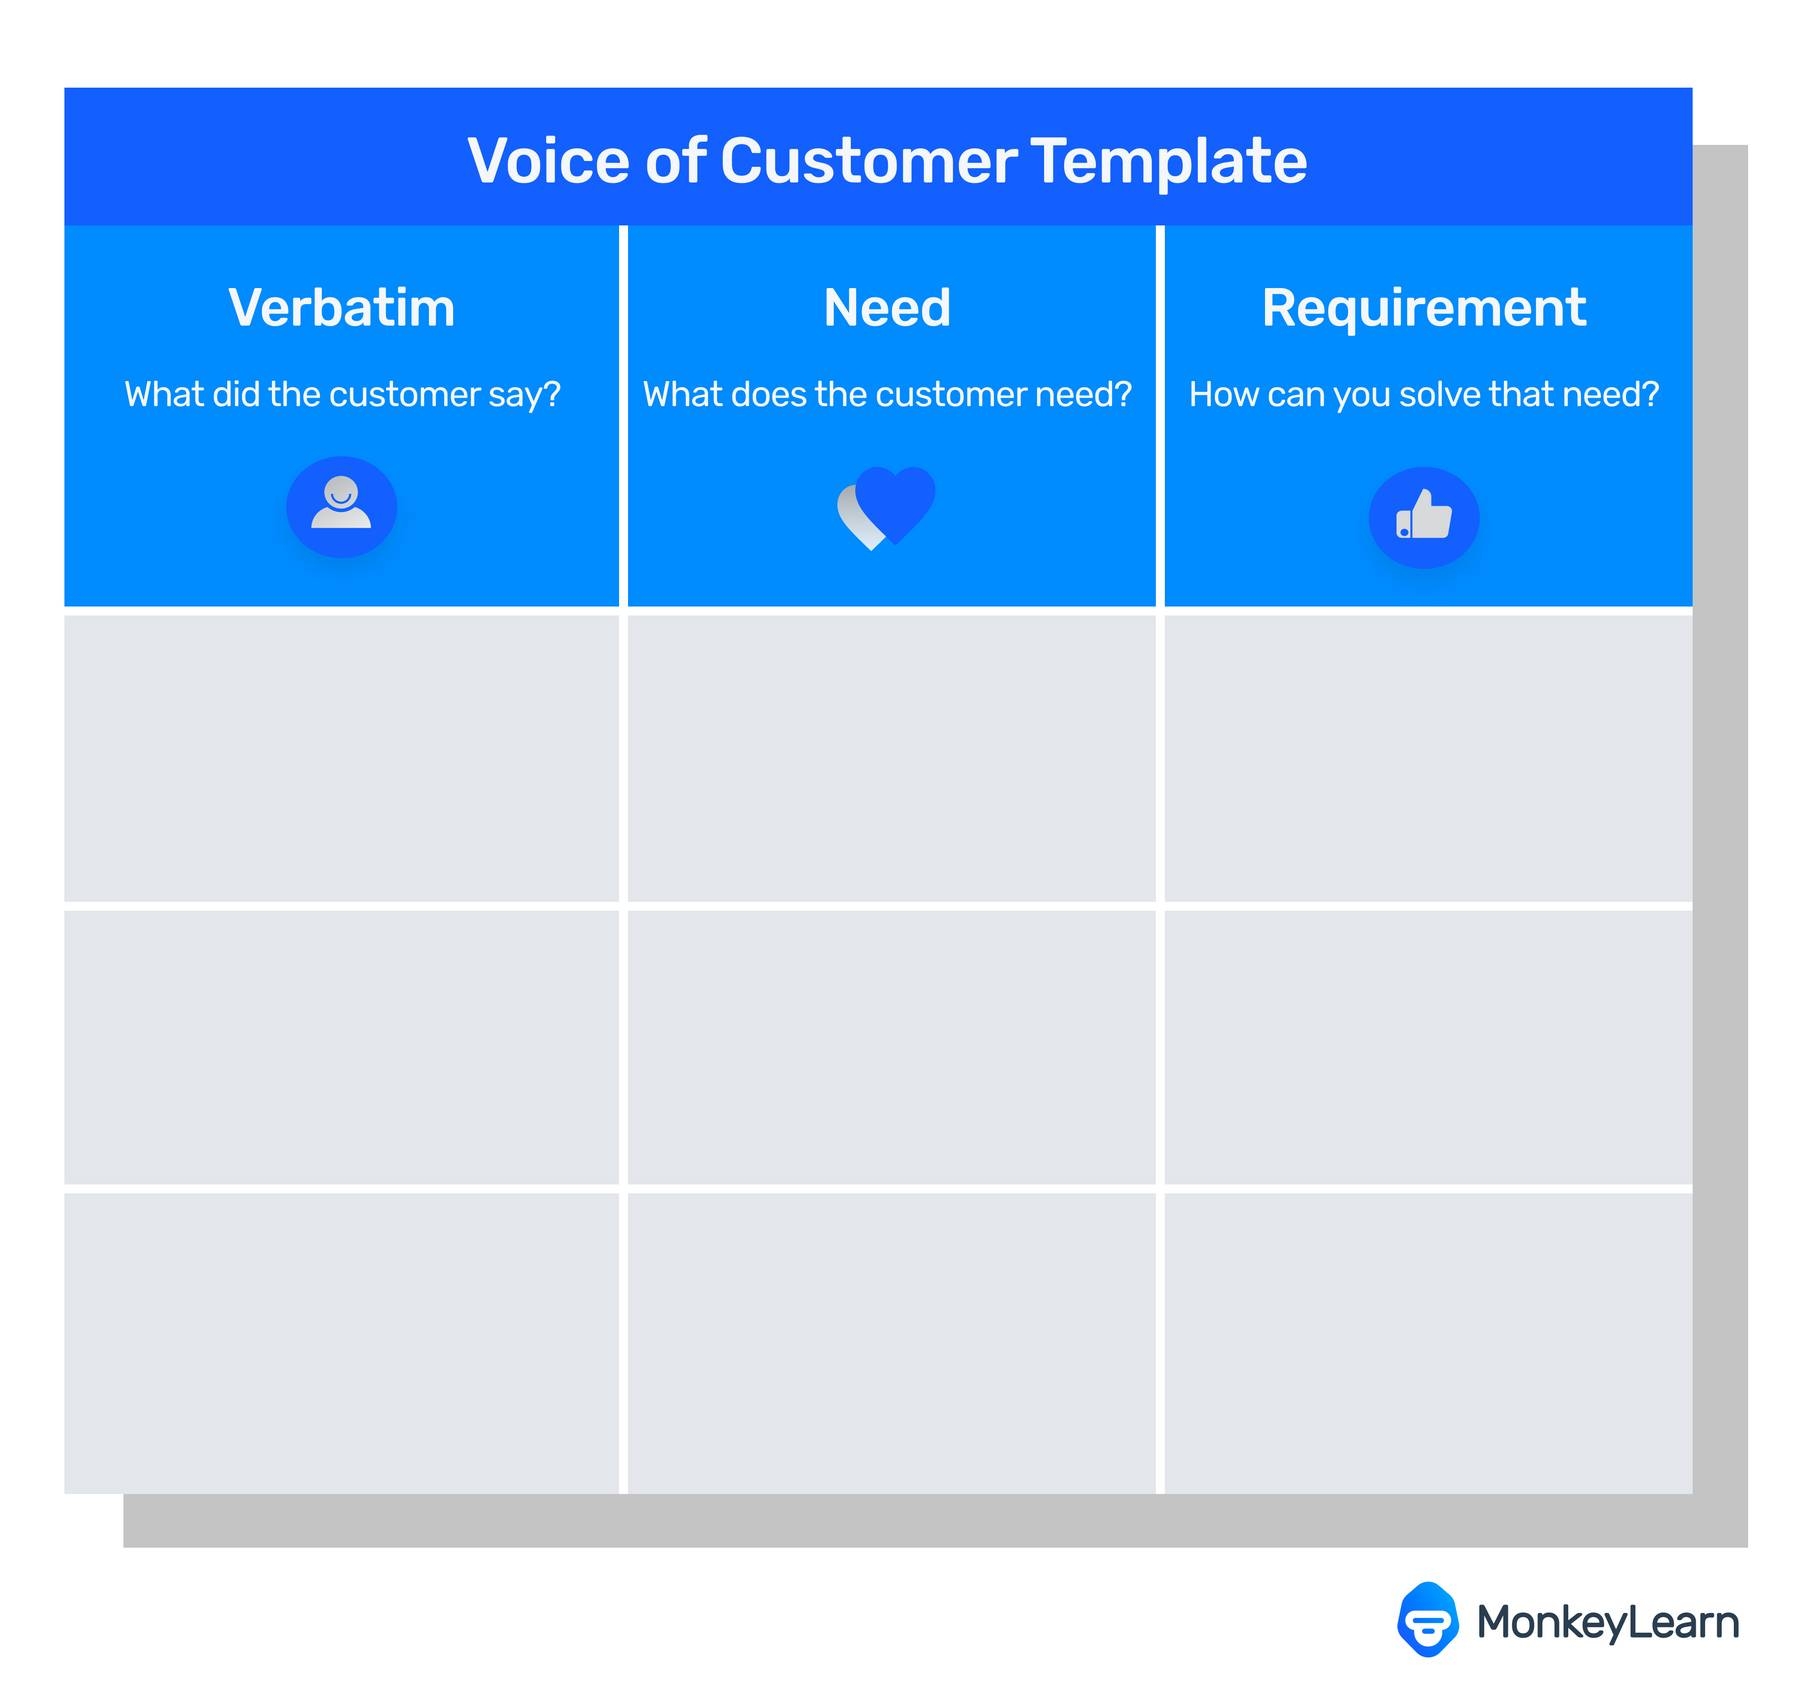 Voice of Customer Template